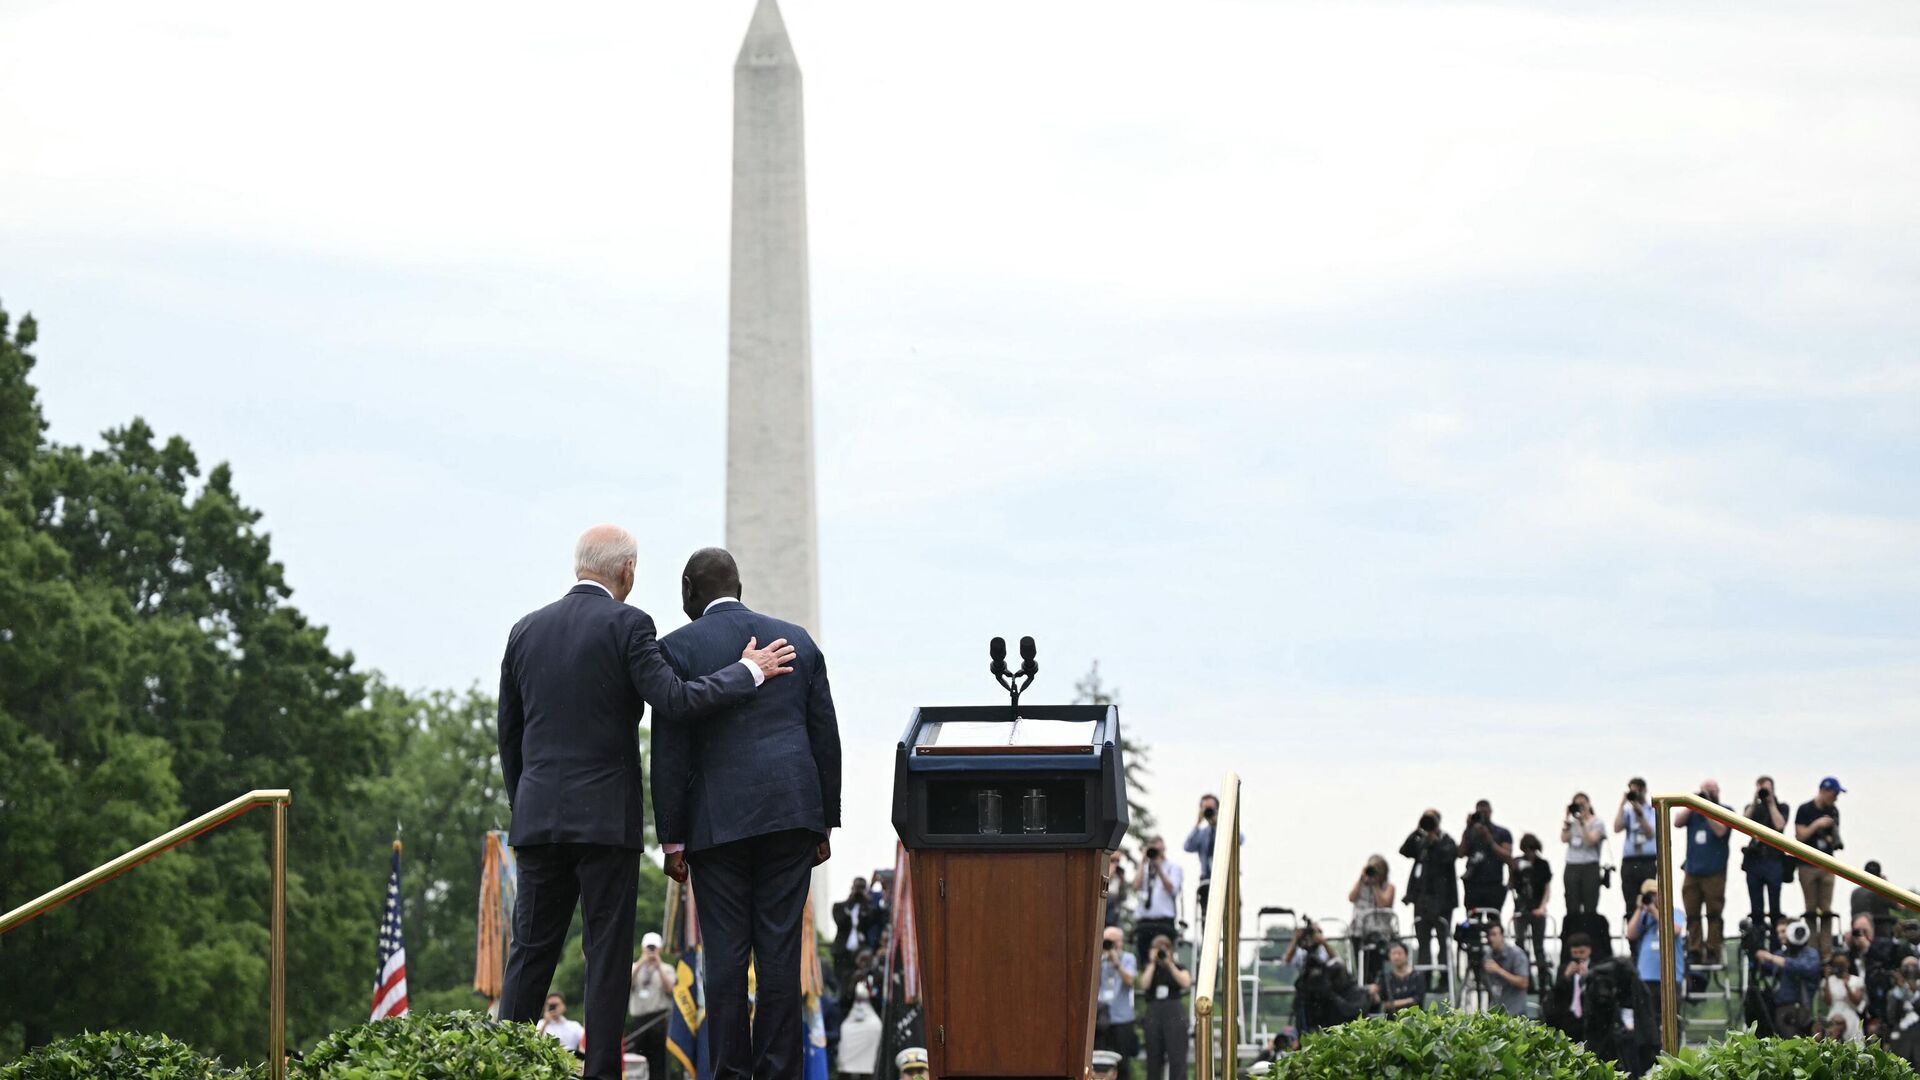 US President Joe Biden (L) welcomes President William Ruto during an official arrival ceremony on the South Lawn of the White House in Washington, DC, on May 23, 2024. Ruto's visit is the first state visit to Washington by an African leader in more than 15 years. - Sputnik International, 1920, 23.05.2024